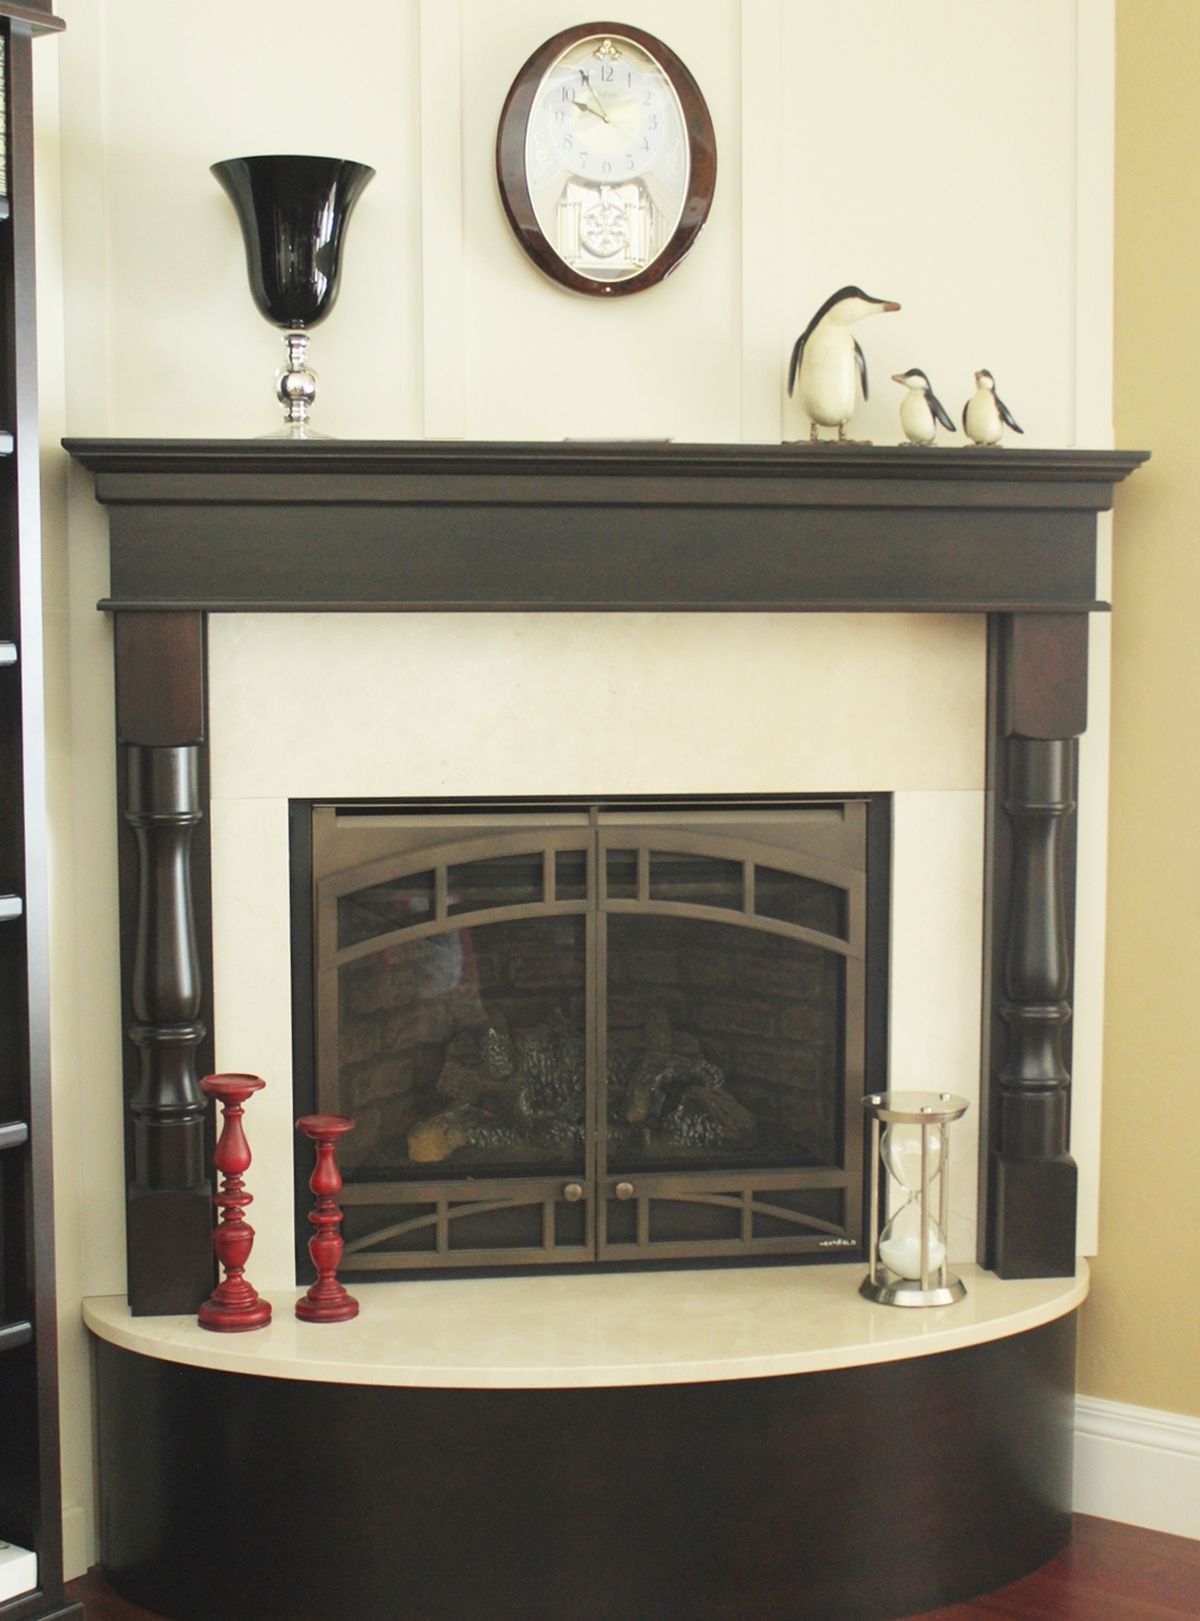 Clocks Over Fireplace Mantel Awesome How to Decorate A Small Living Room with Style